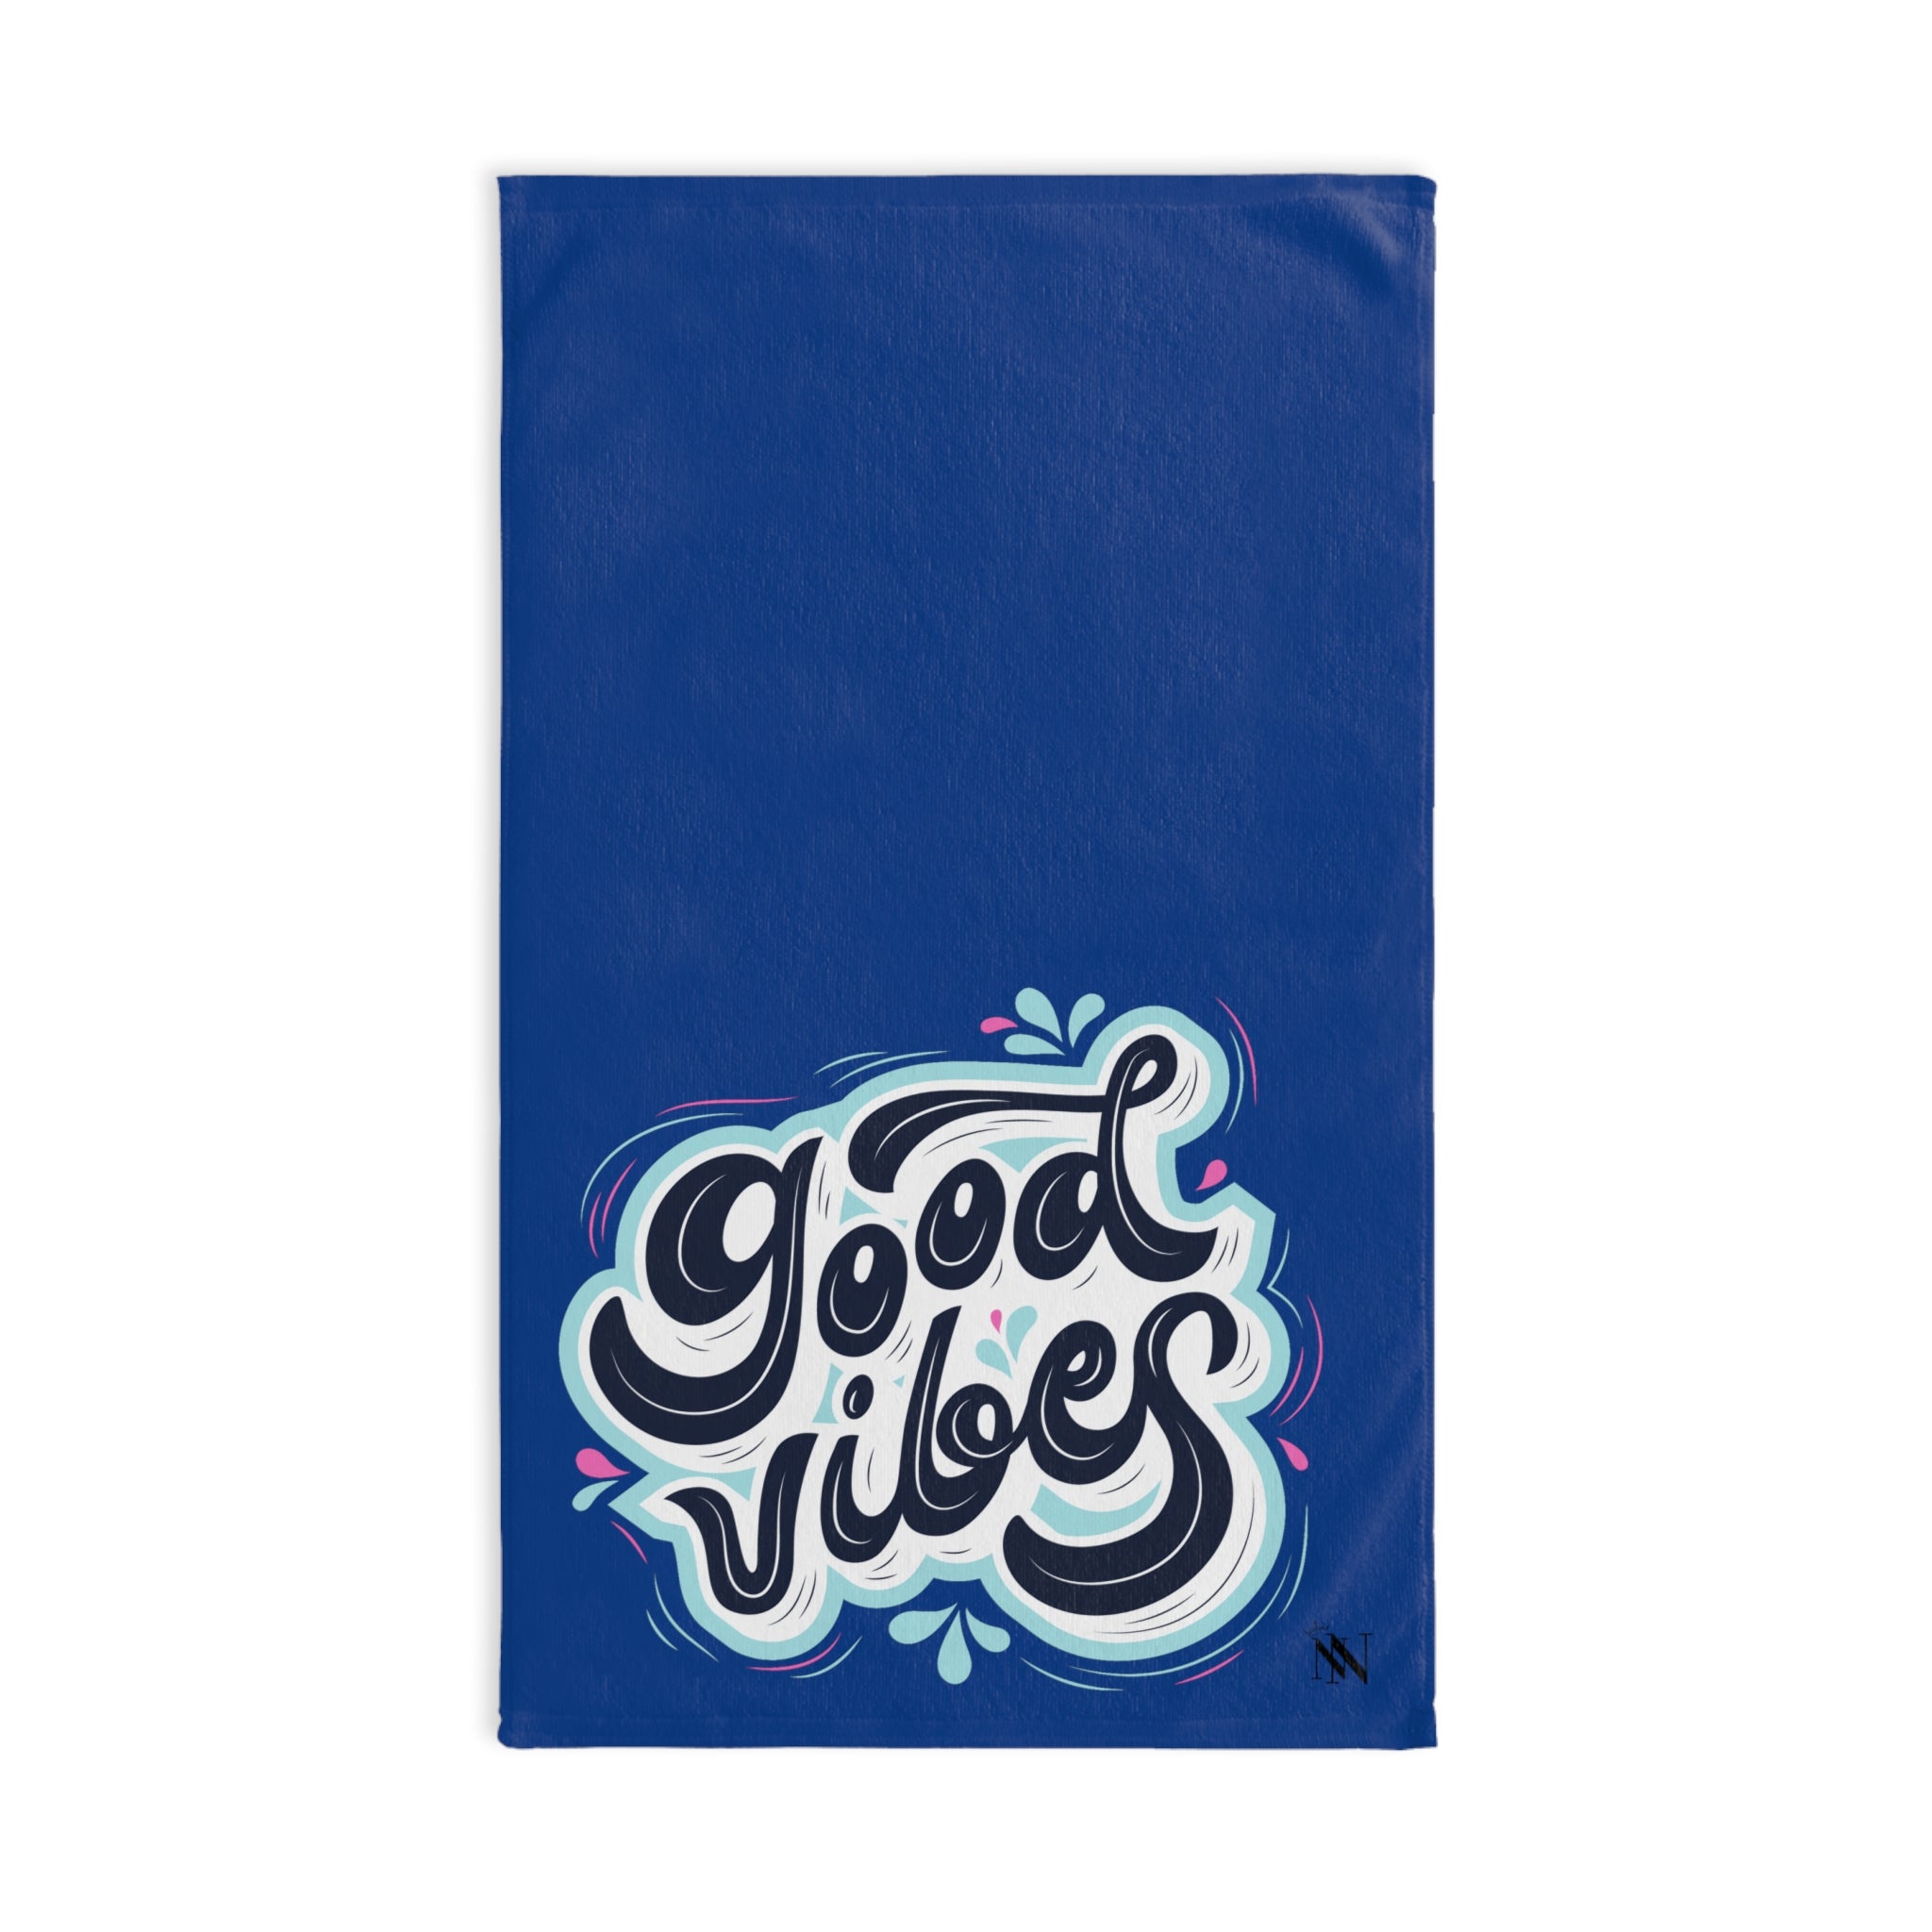 Splash Good Vibes Blue | Gifts for Boyfriend, Funny Towel Romantic Gift for Wedding Couple Fiance First Year Anniversary Valentines, Party Gag Gifts, Joke Humor Cloth for Husband Men BF NECTAR NAPKINS